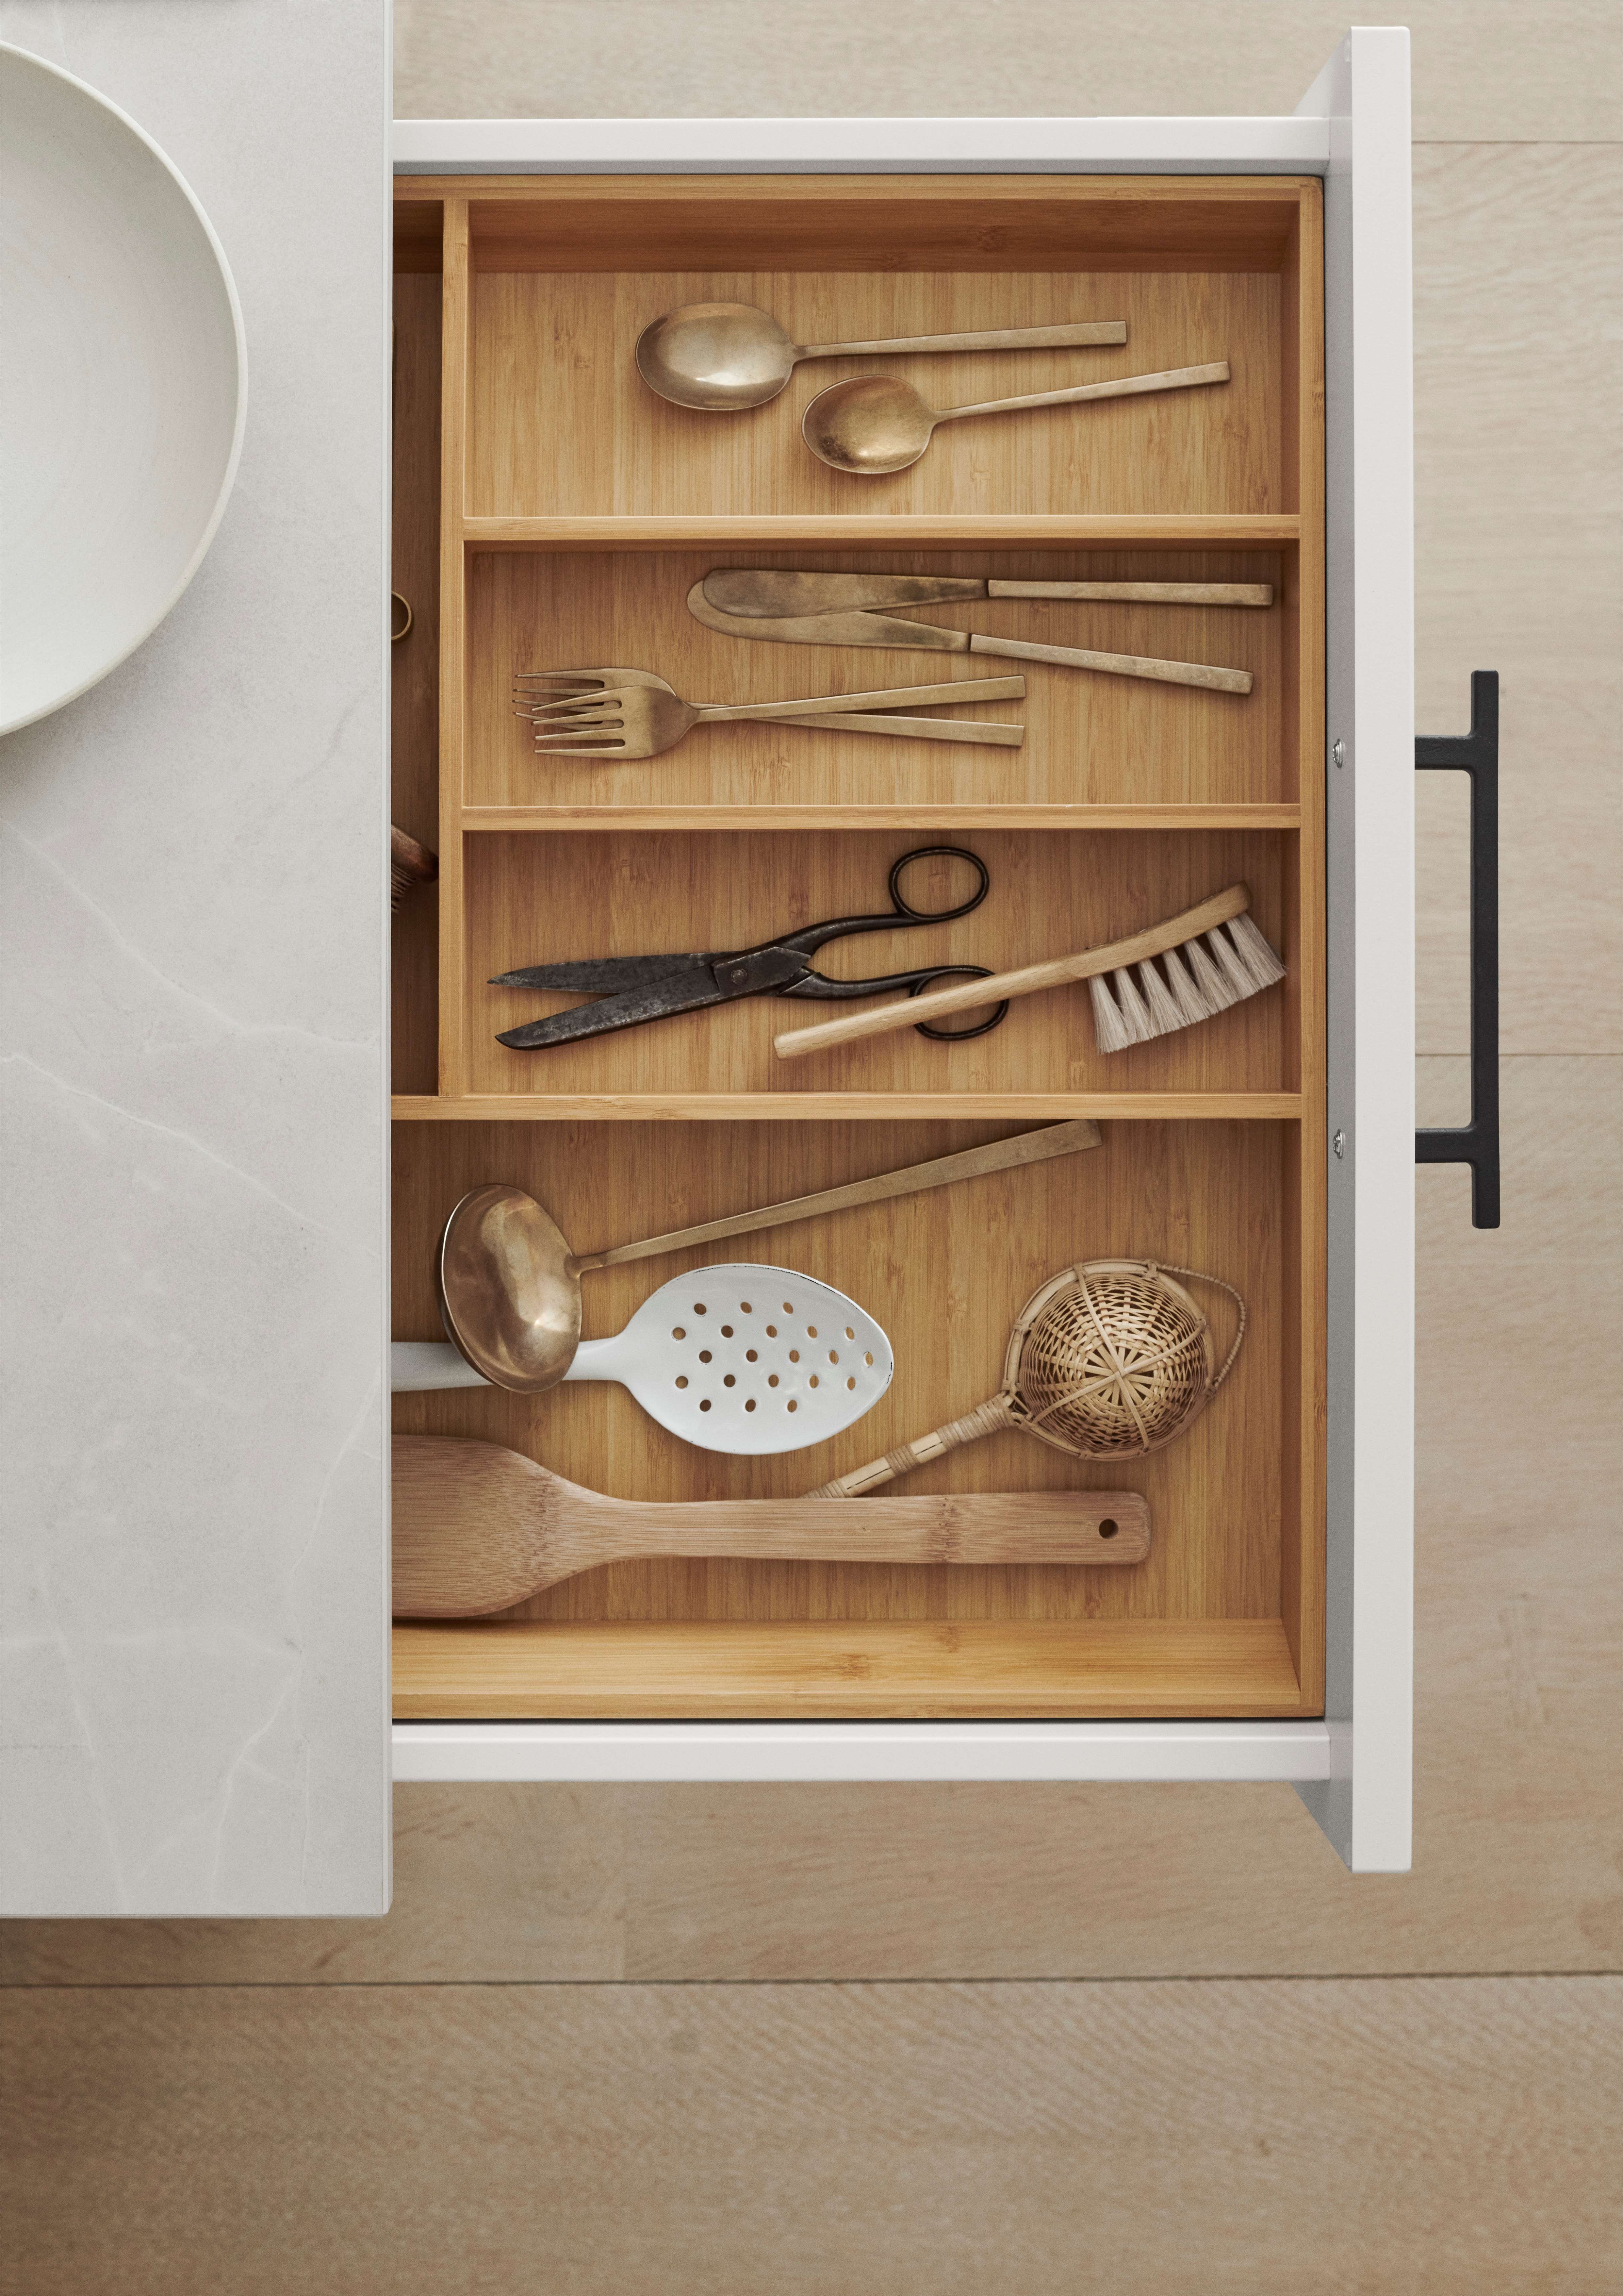 White kitchen rawer with a bamboo insert for the kitchen cutlery